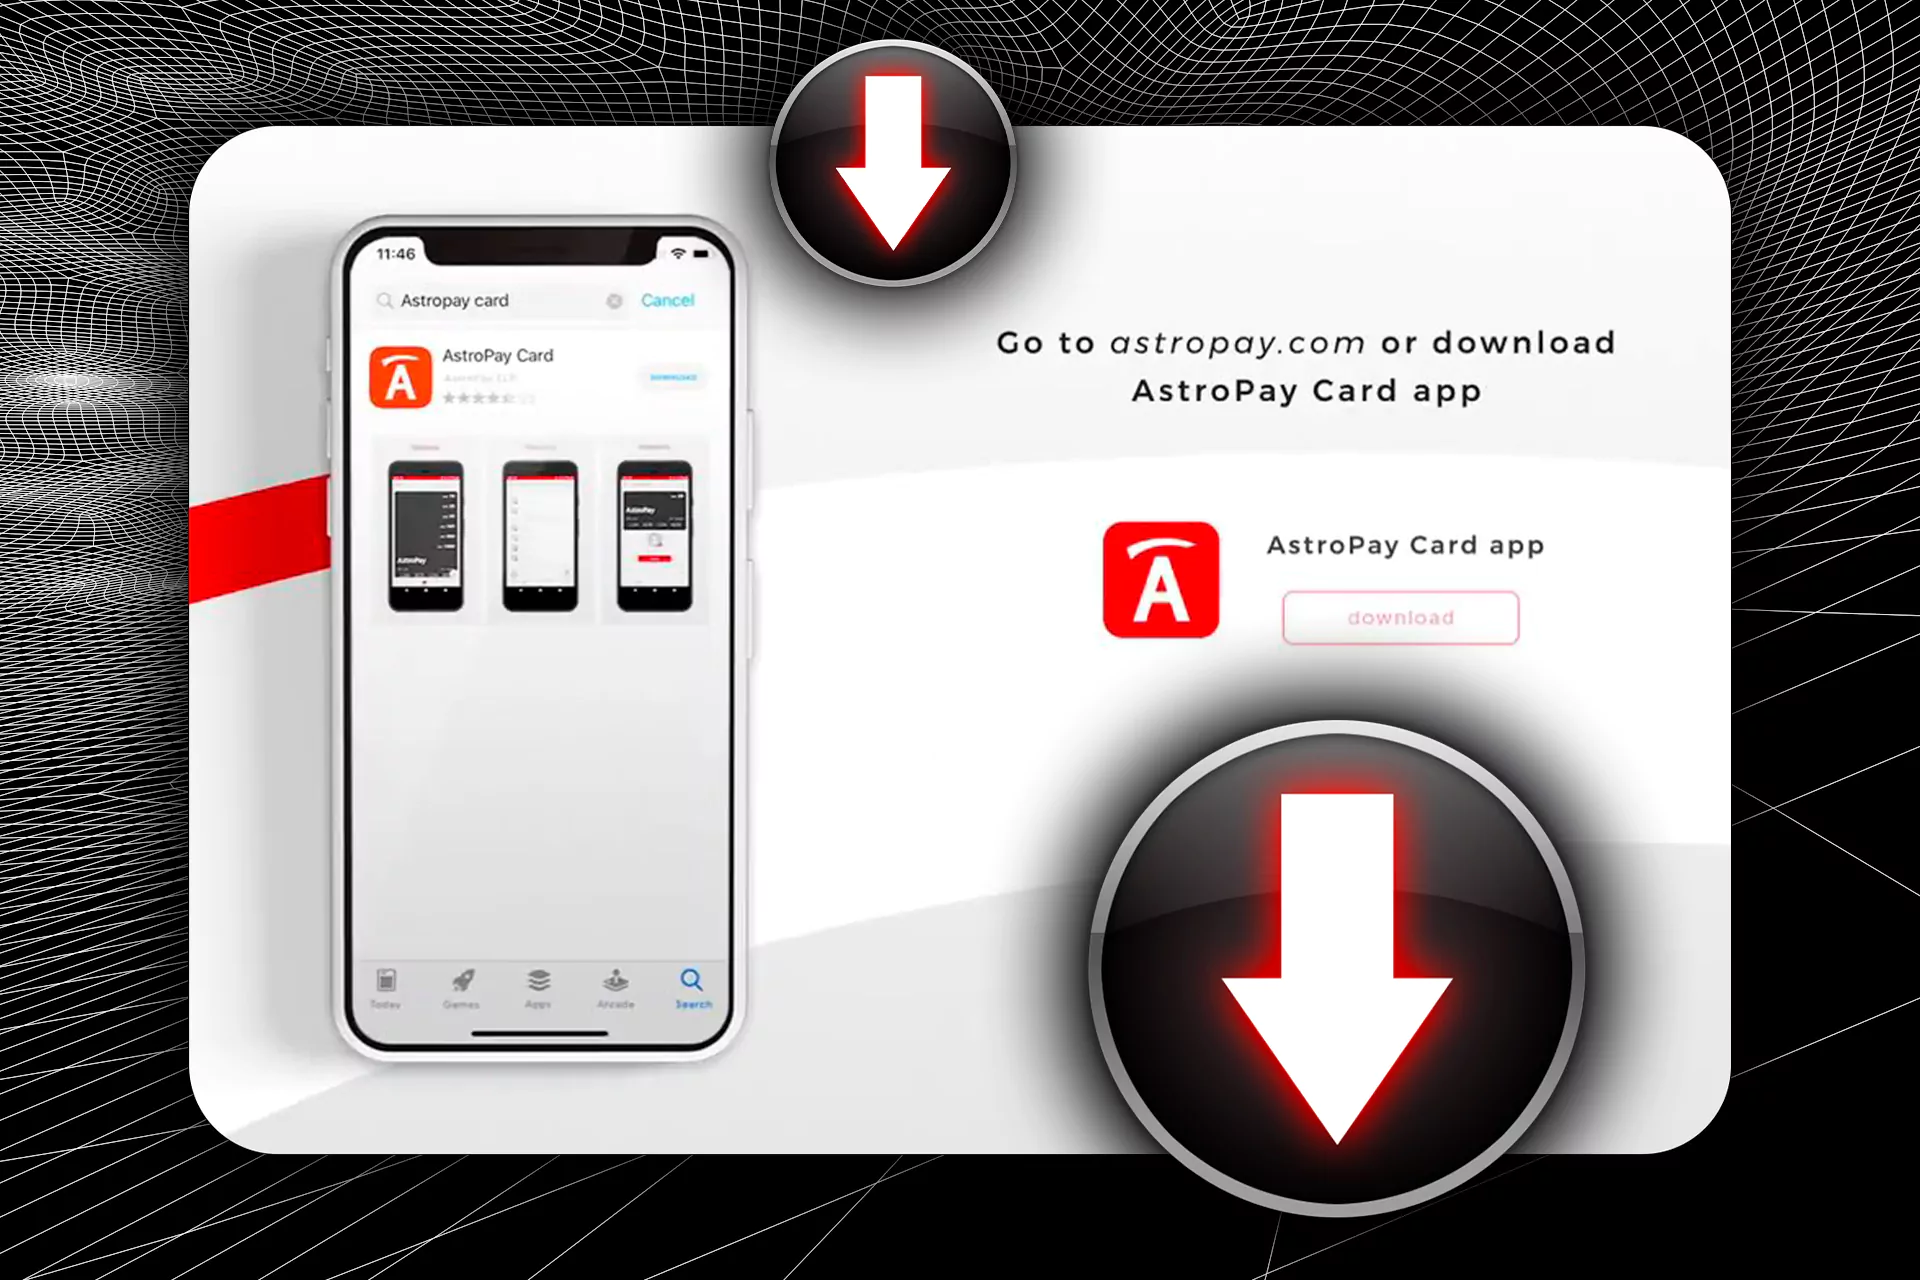 You'll find the Astropay app in your phone's store.